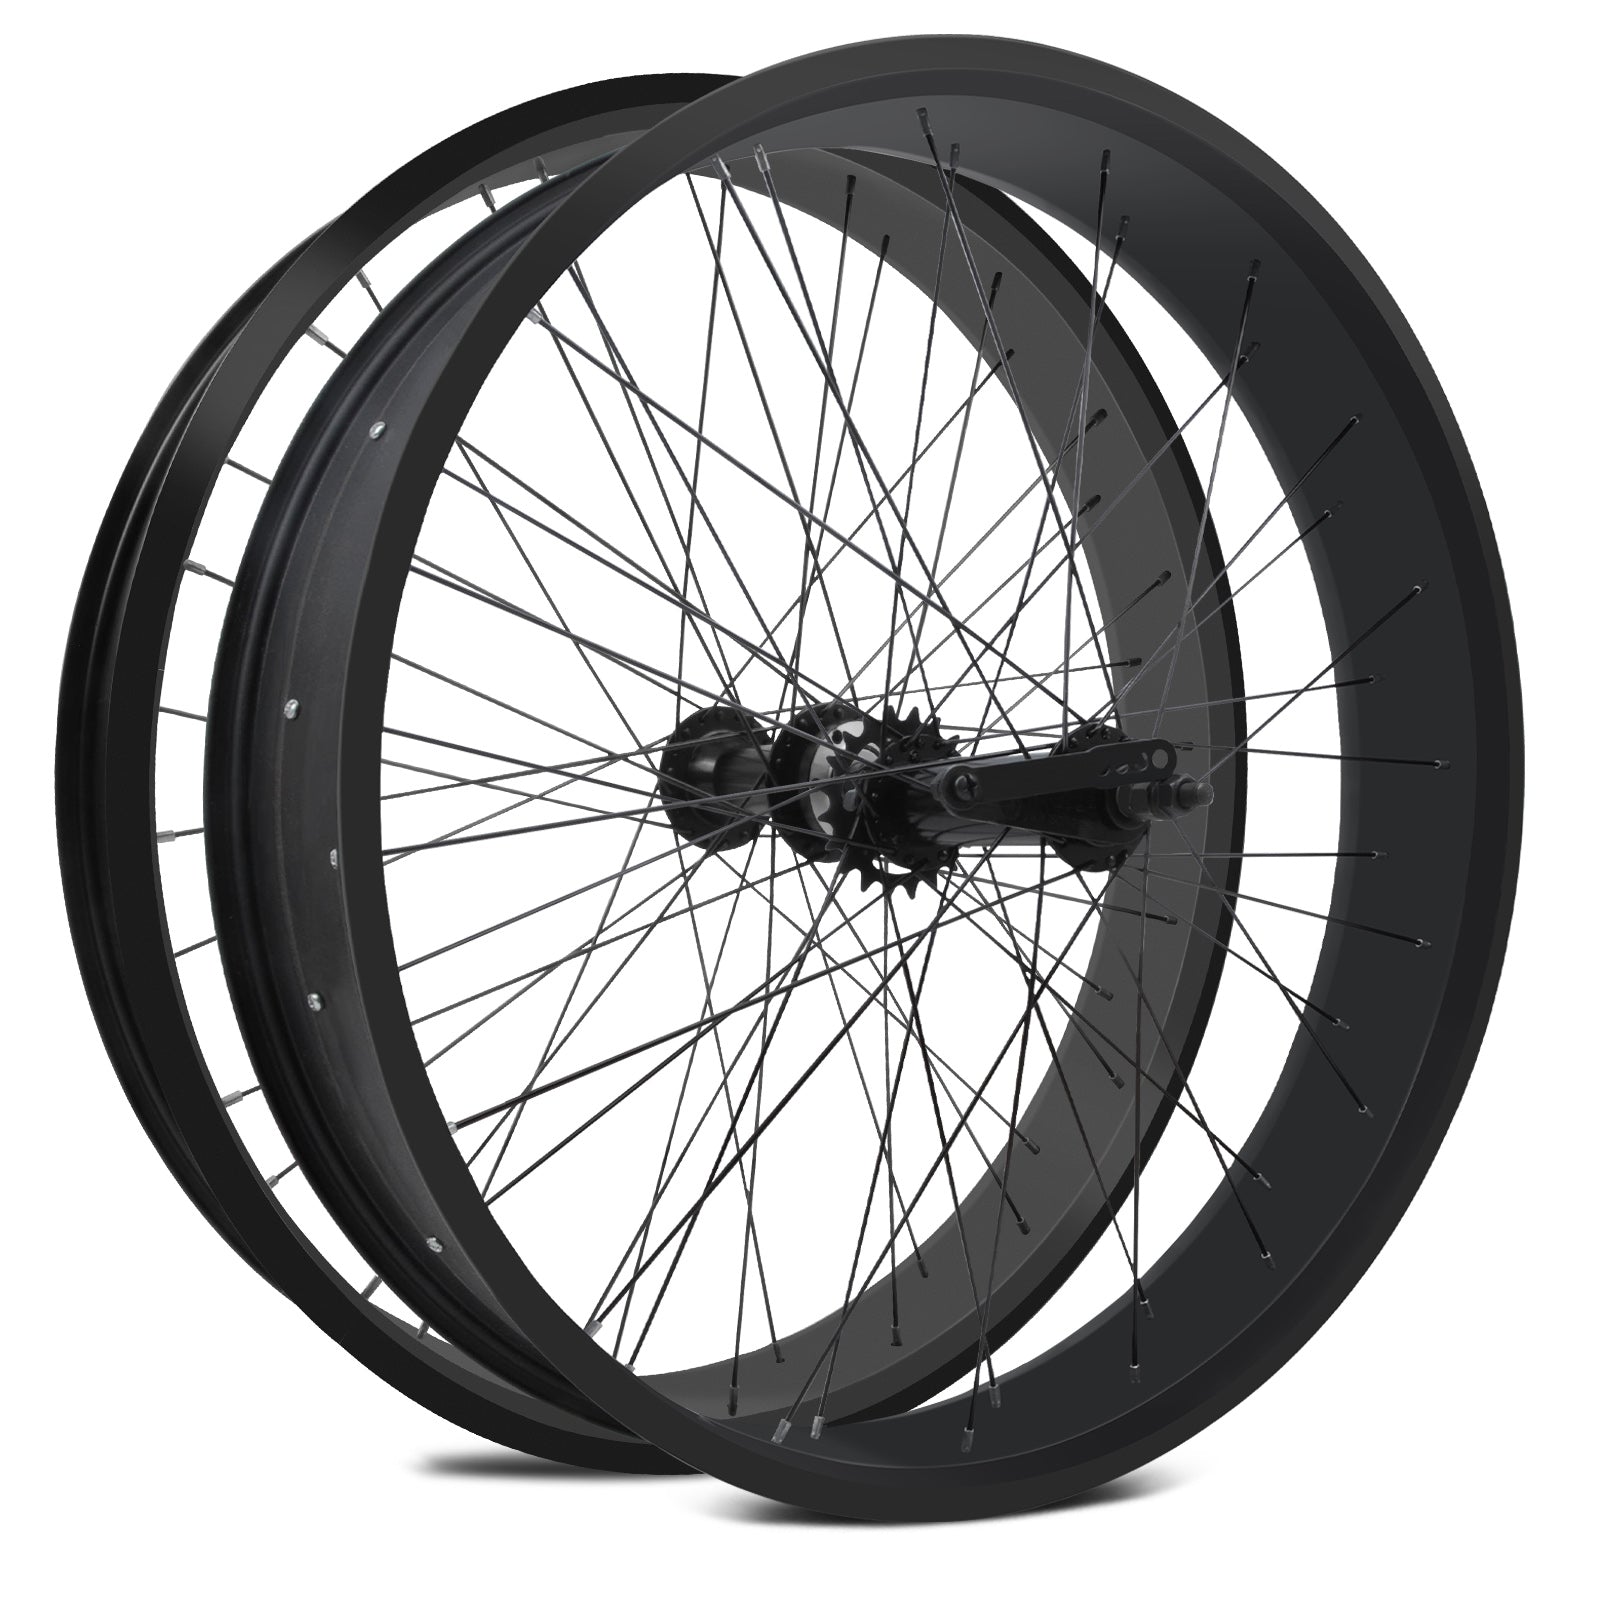 Tracer WH-T952636C Alloy FAT Rims Wheel Set for 26"x3.0,4.0 tire  single-Speed